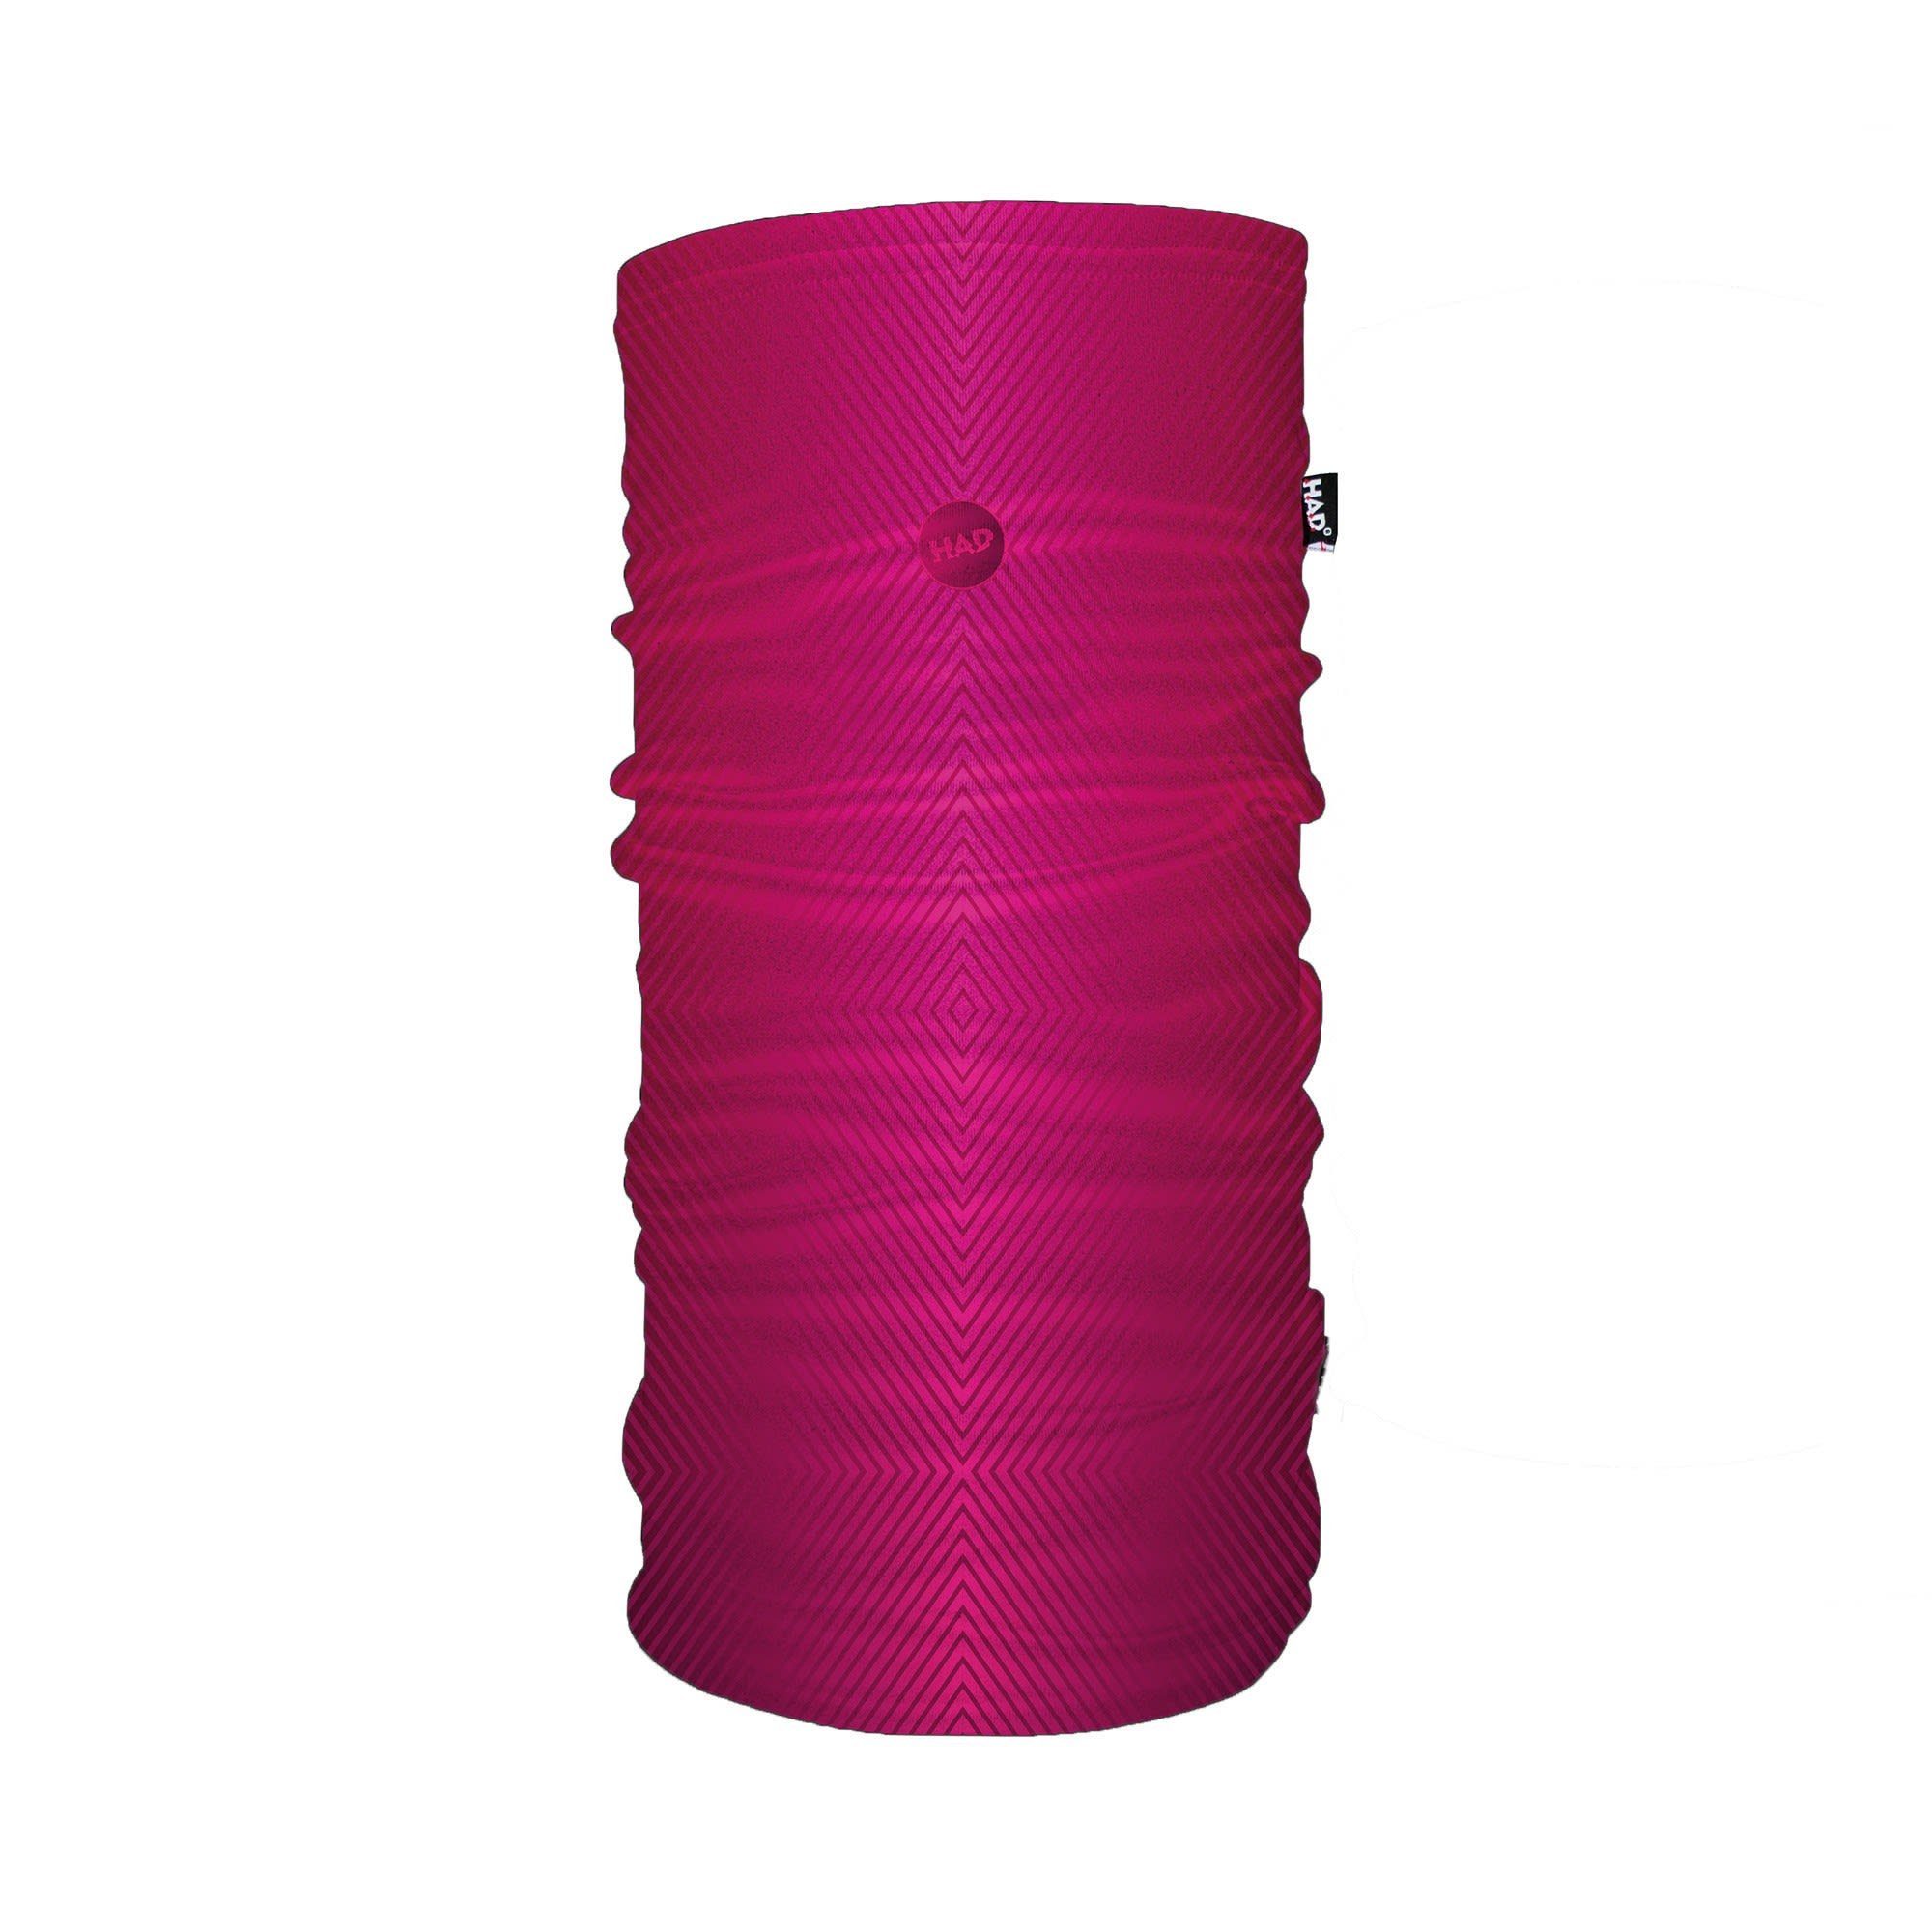 HAD Schal H.a.d. Brushed Eco Tube Multifunktionstuch Rosa | Modeschals